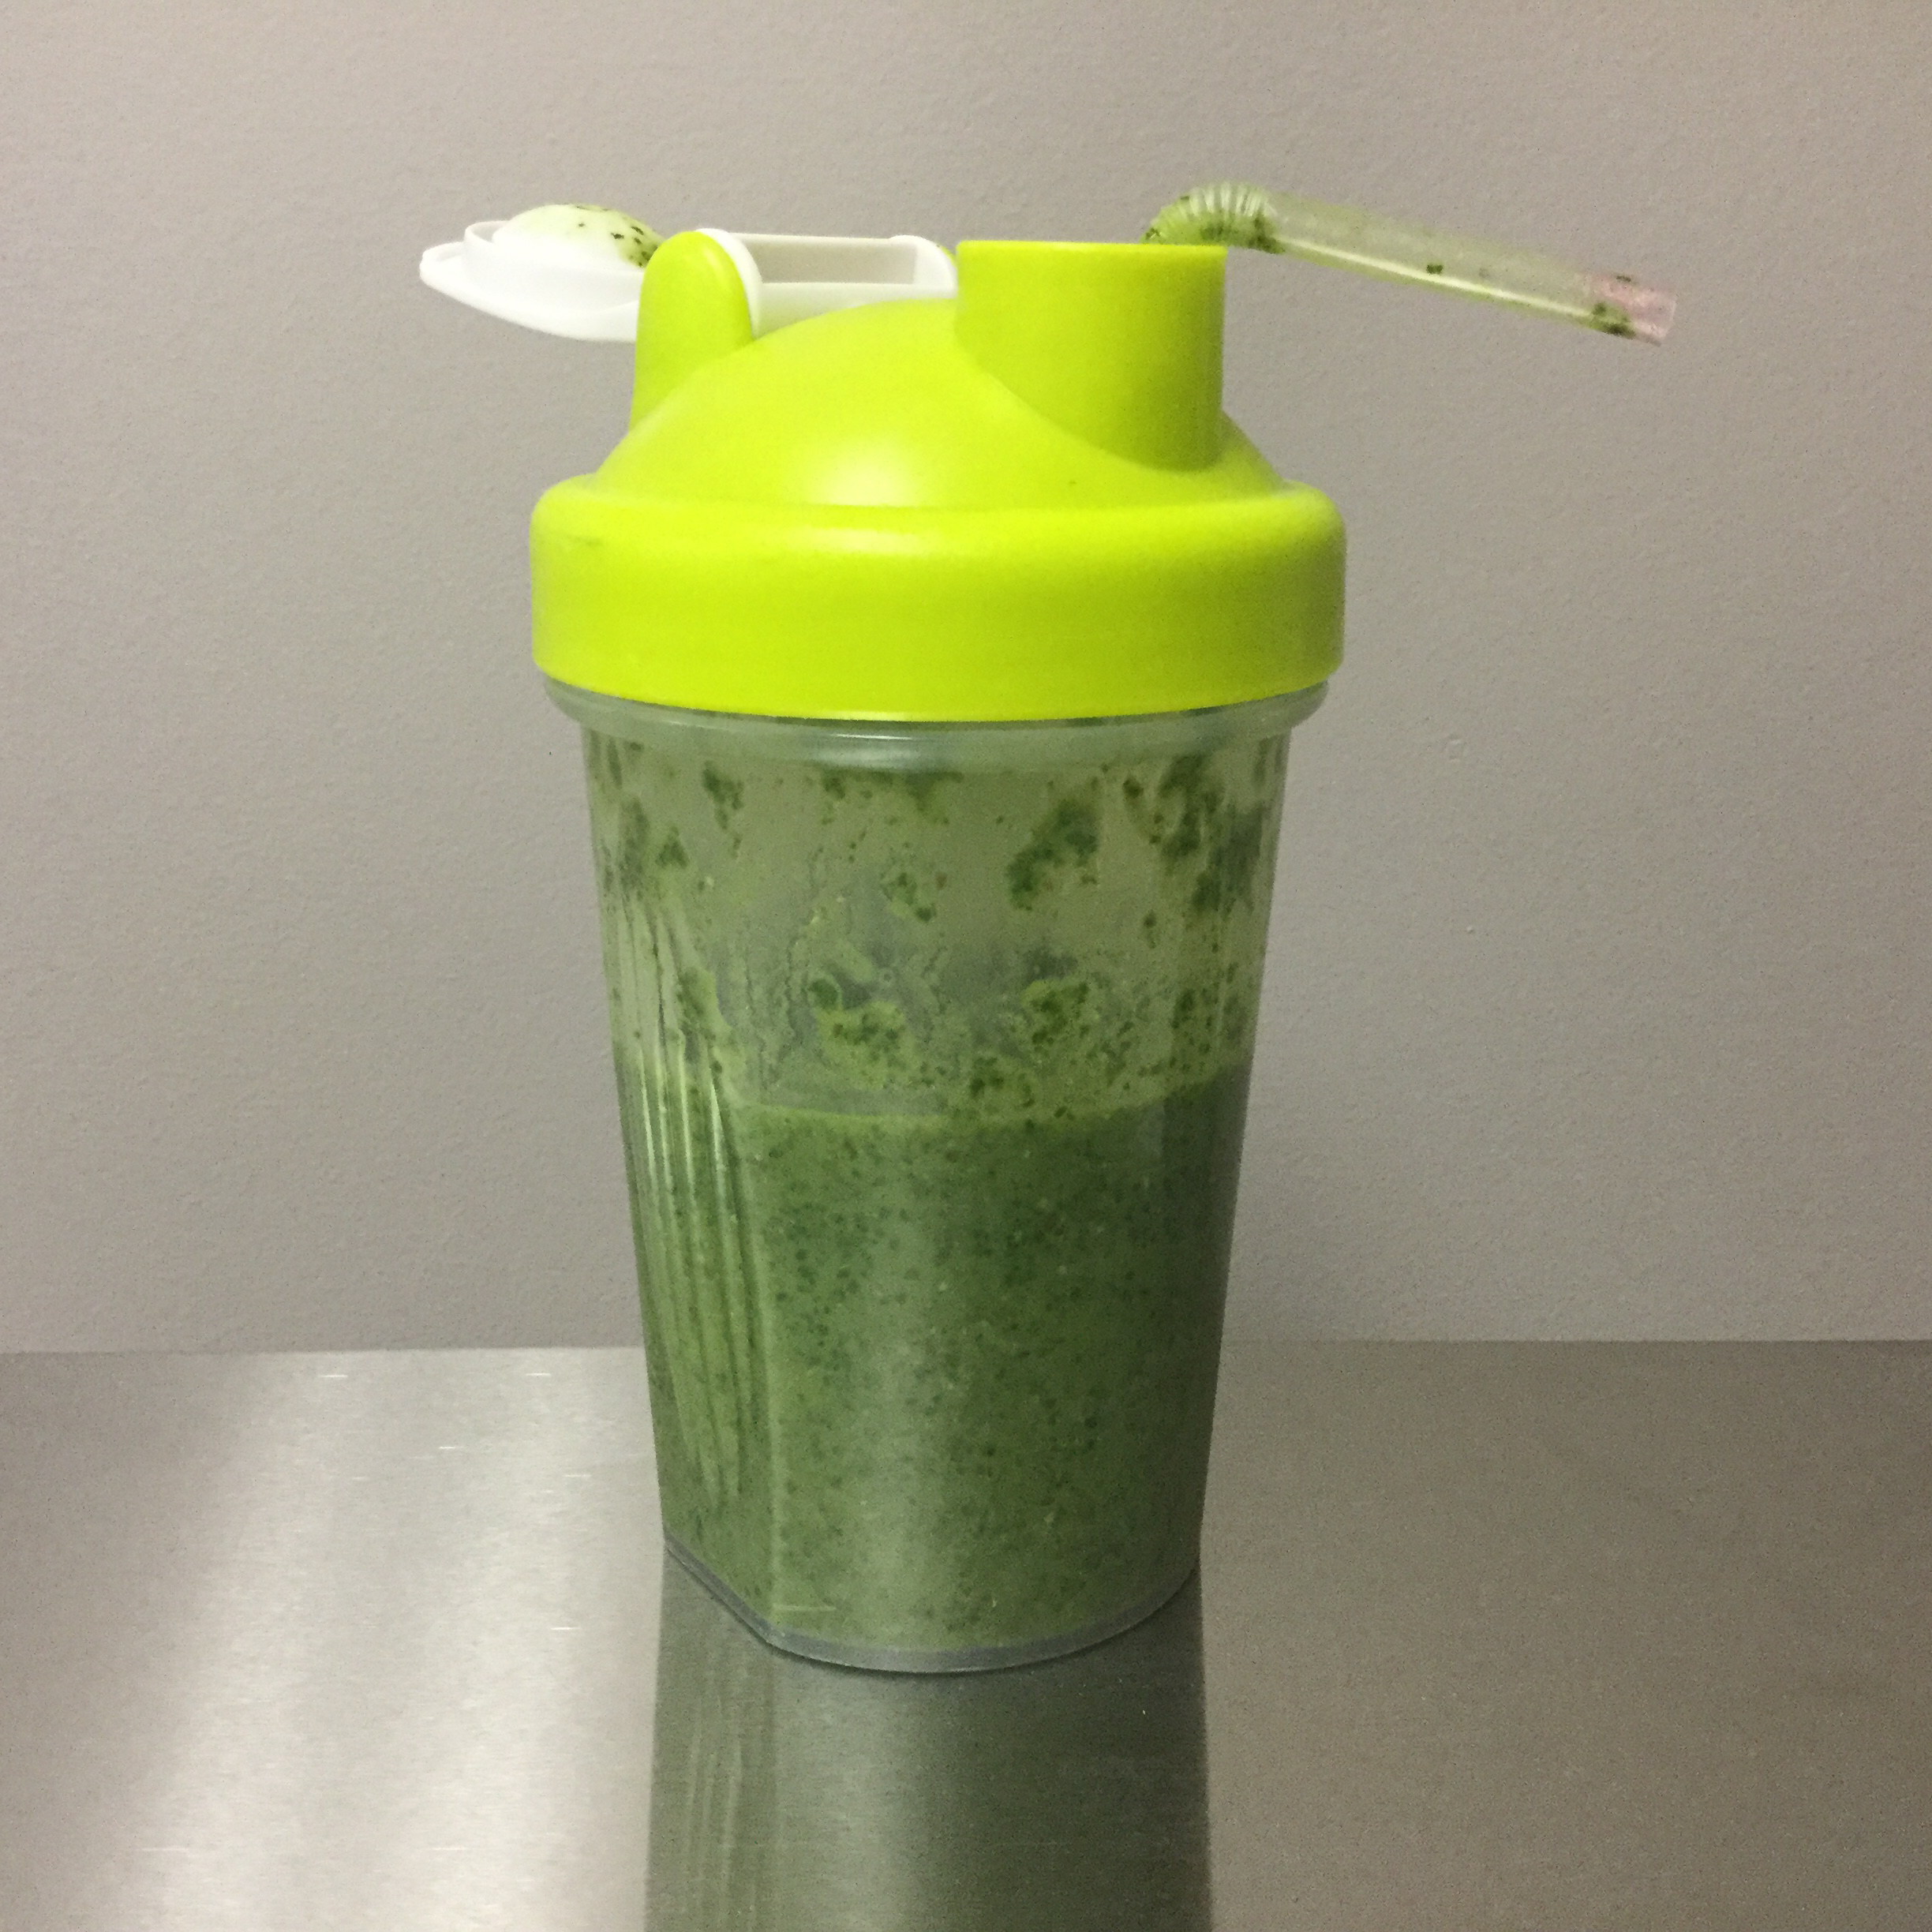 Quick Kale and Banana Smoothie 